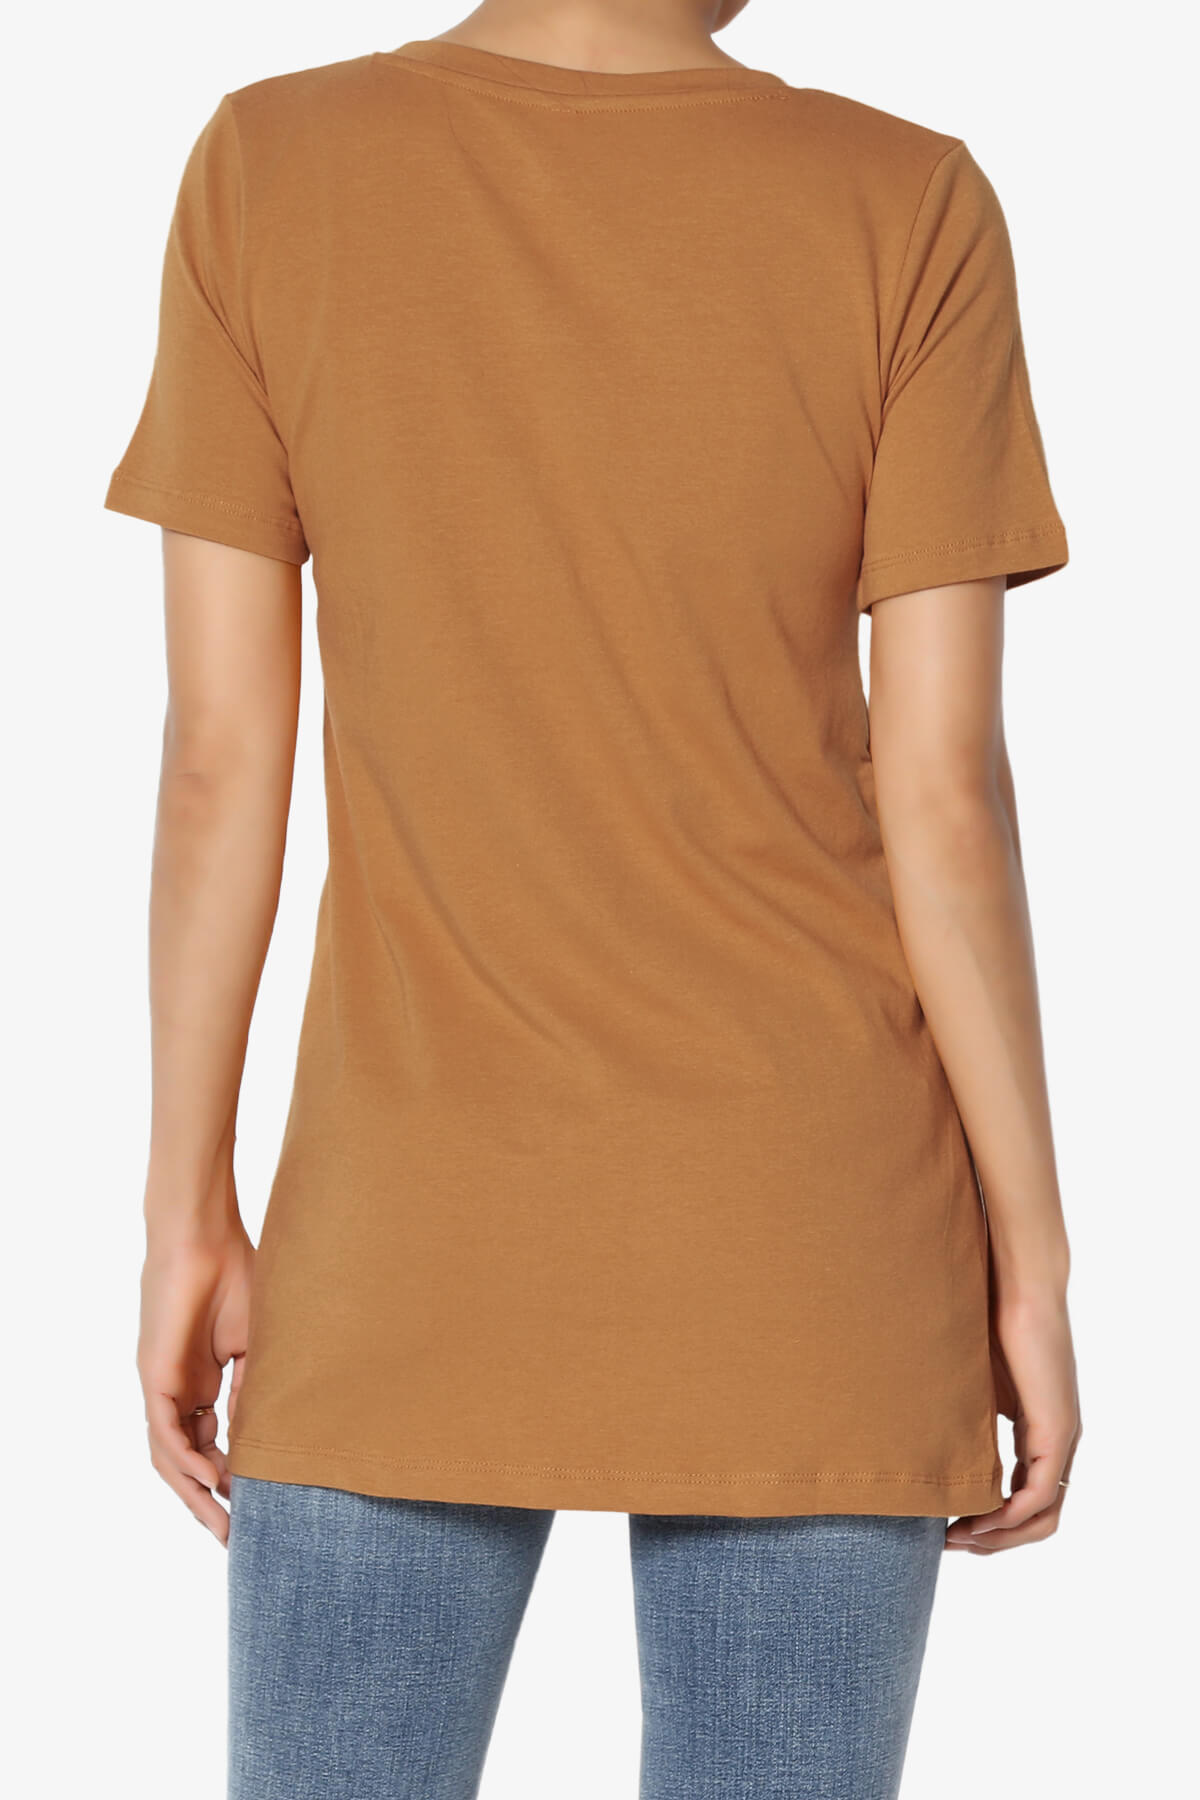 Load image into Gallery viewer, Elora V-Neck Short Sleeve T-Shirt COFFEE_2
